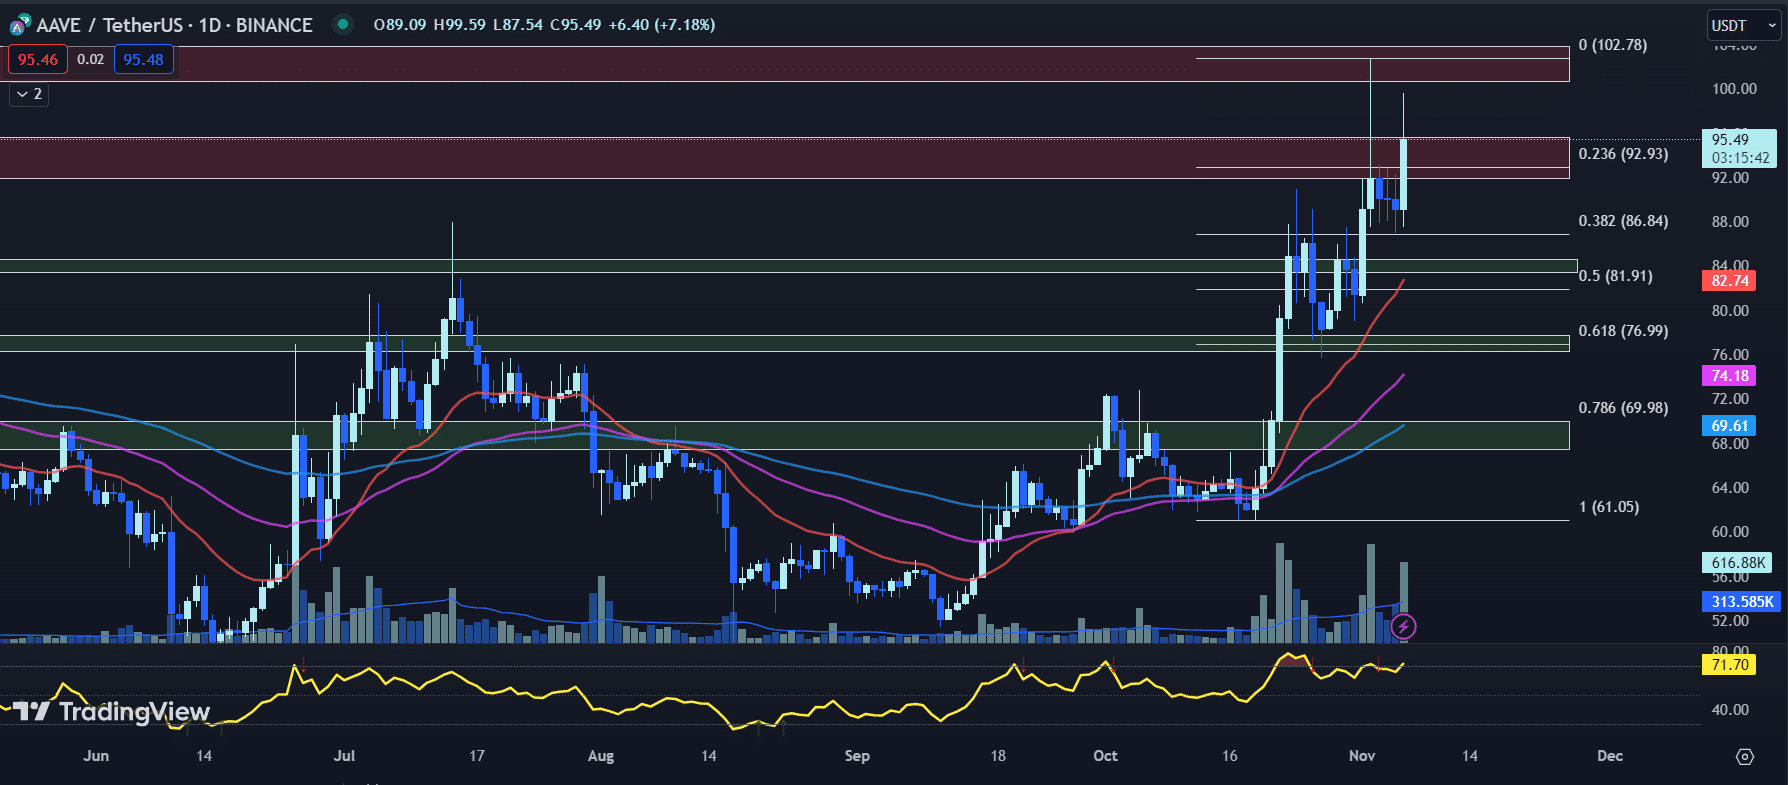 tradingview chart for the aave price 11-06-23